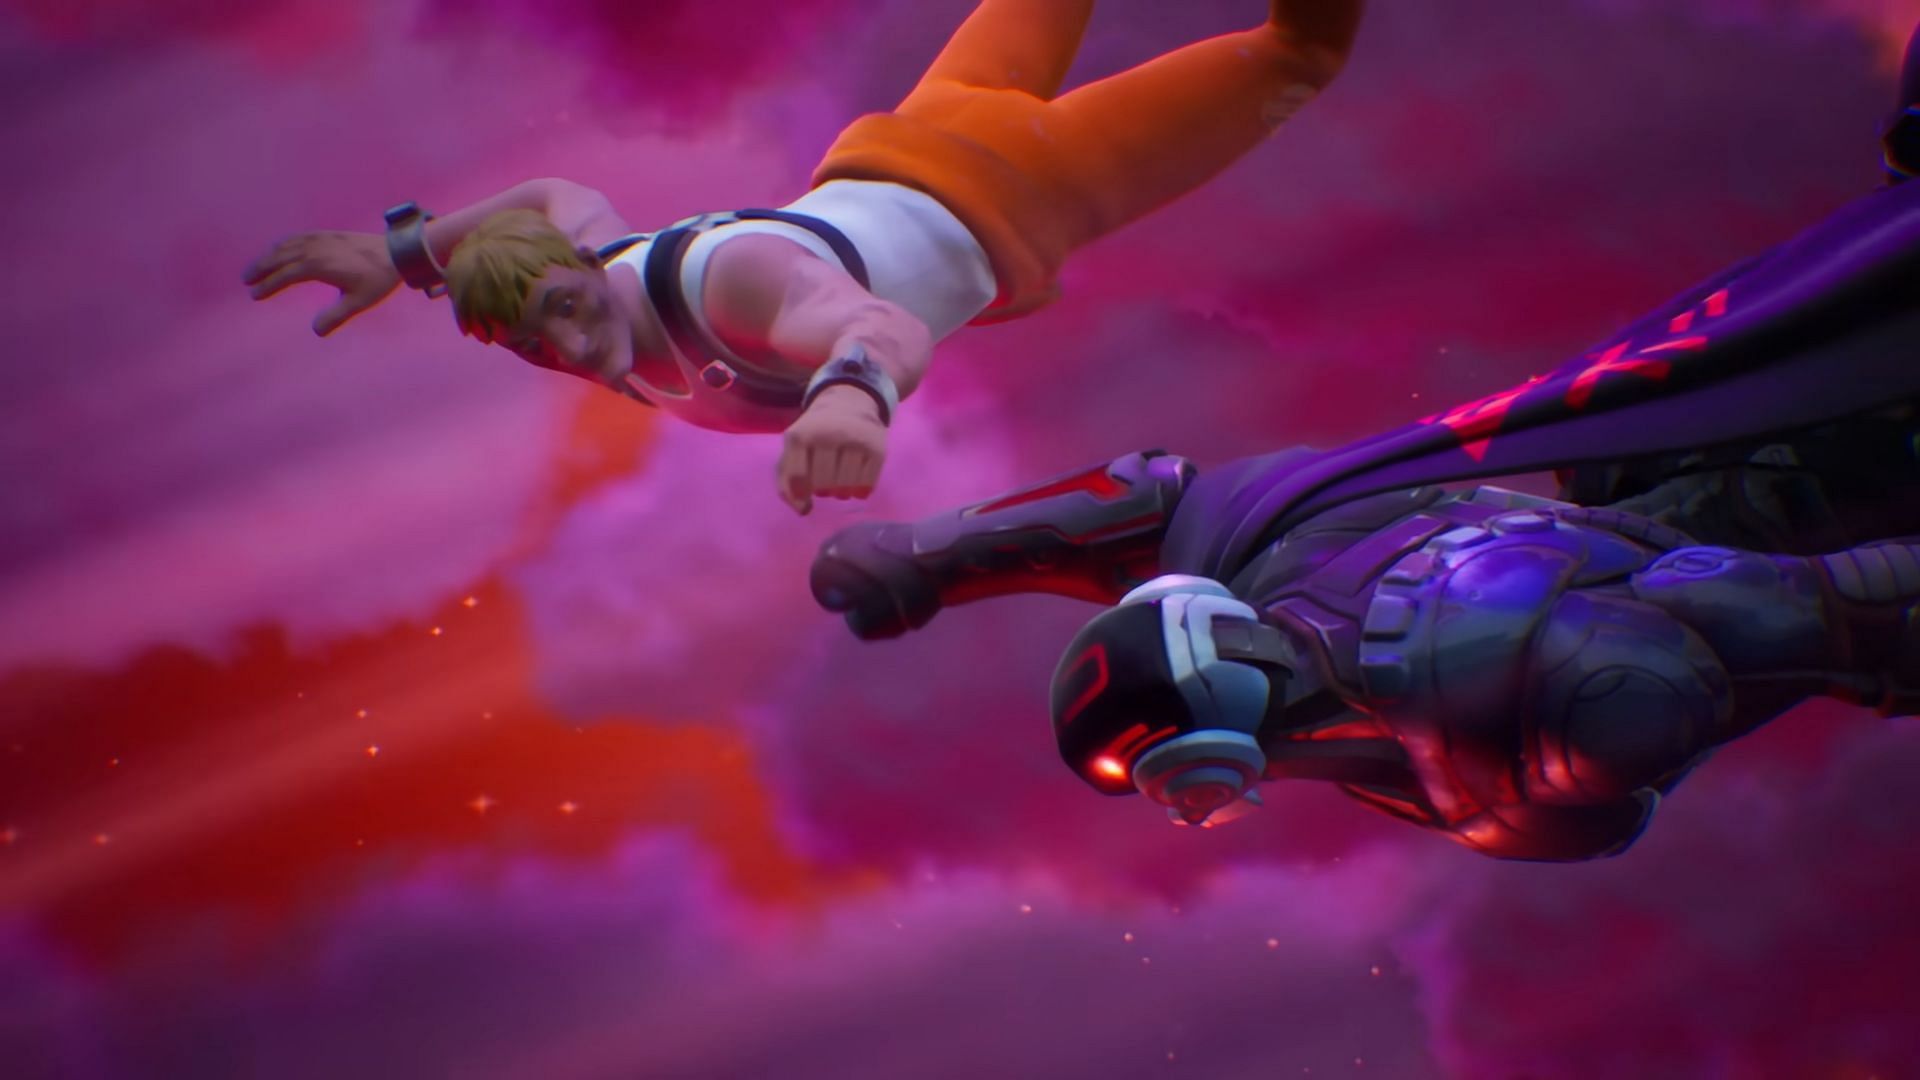 The most epic fist bump of all times (Image via YouTube/Fortnite)